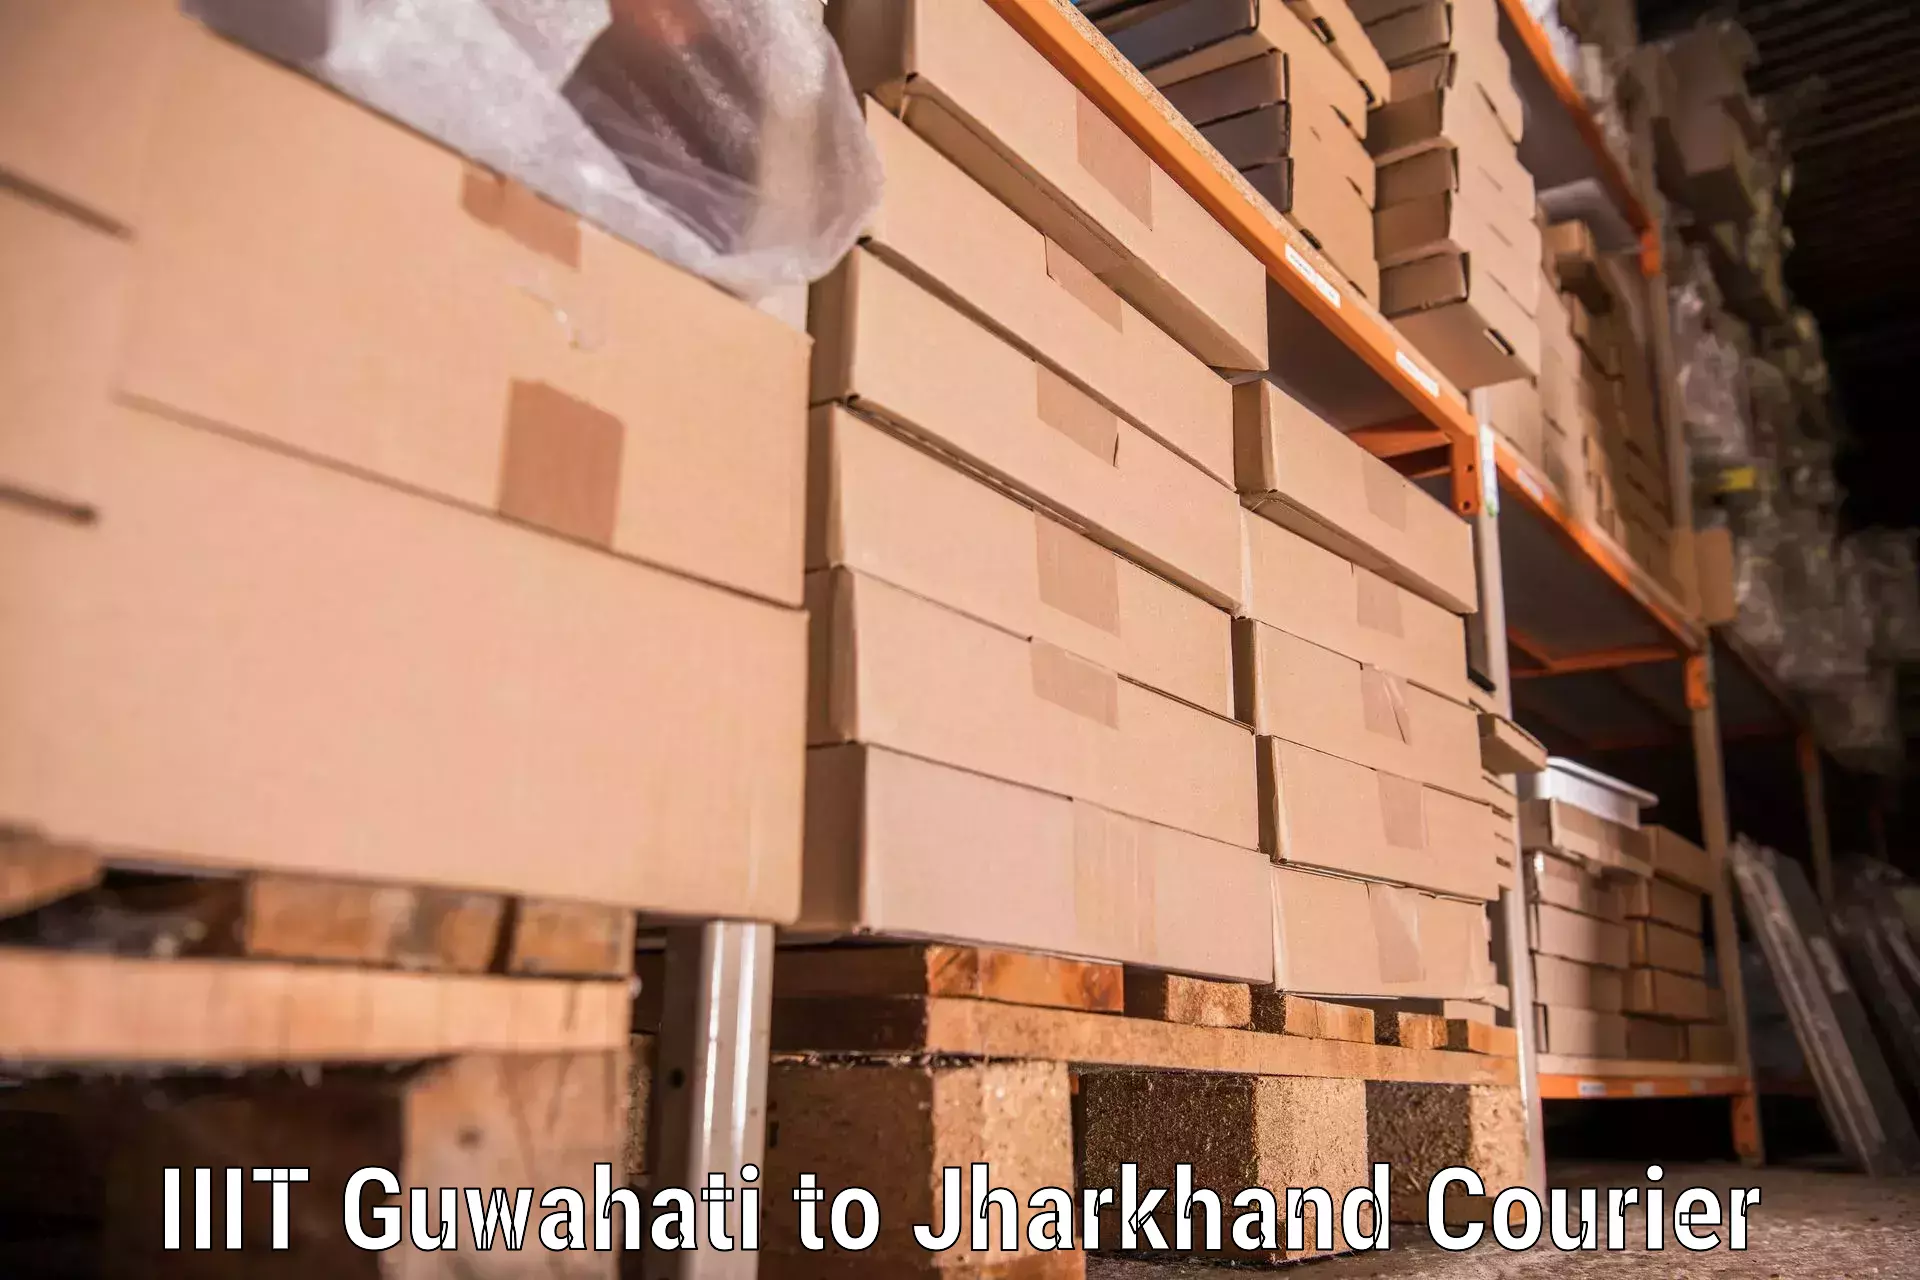 Tailored moving packages IIIT Guwahati to Jamshedpur